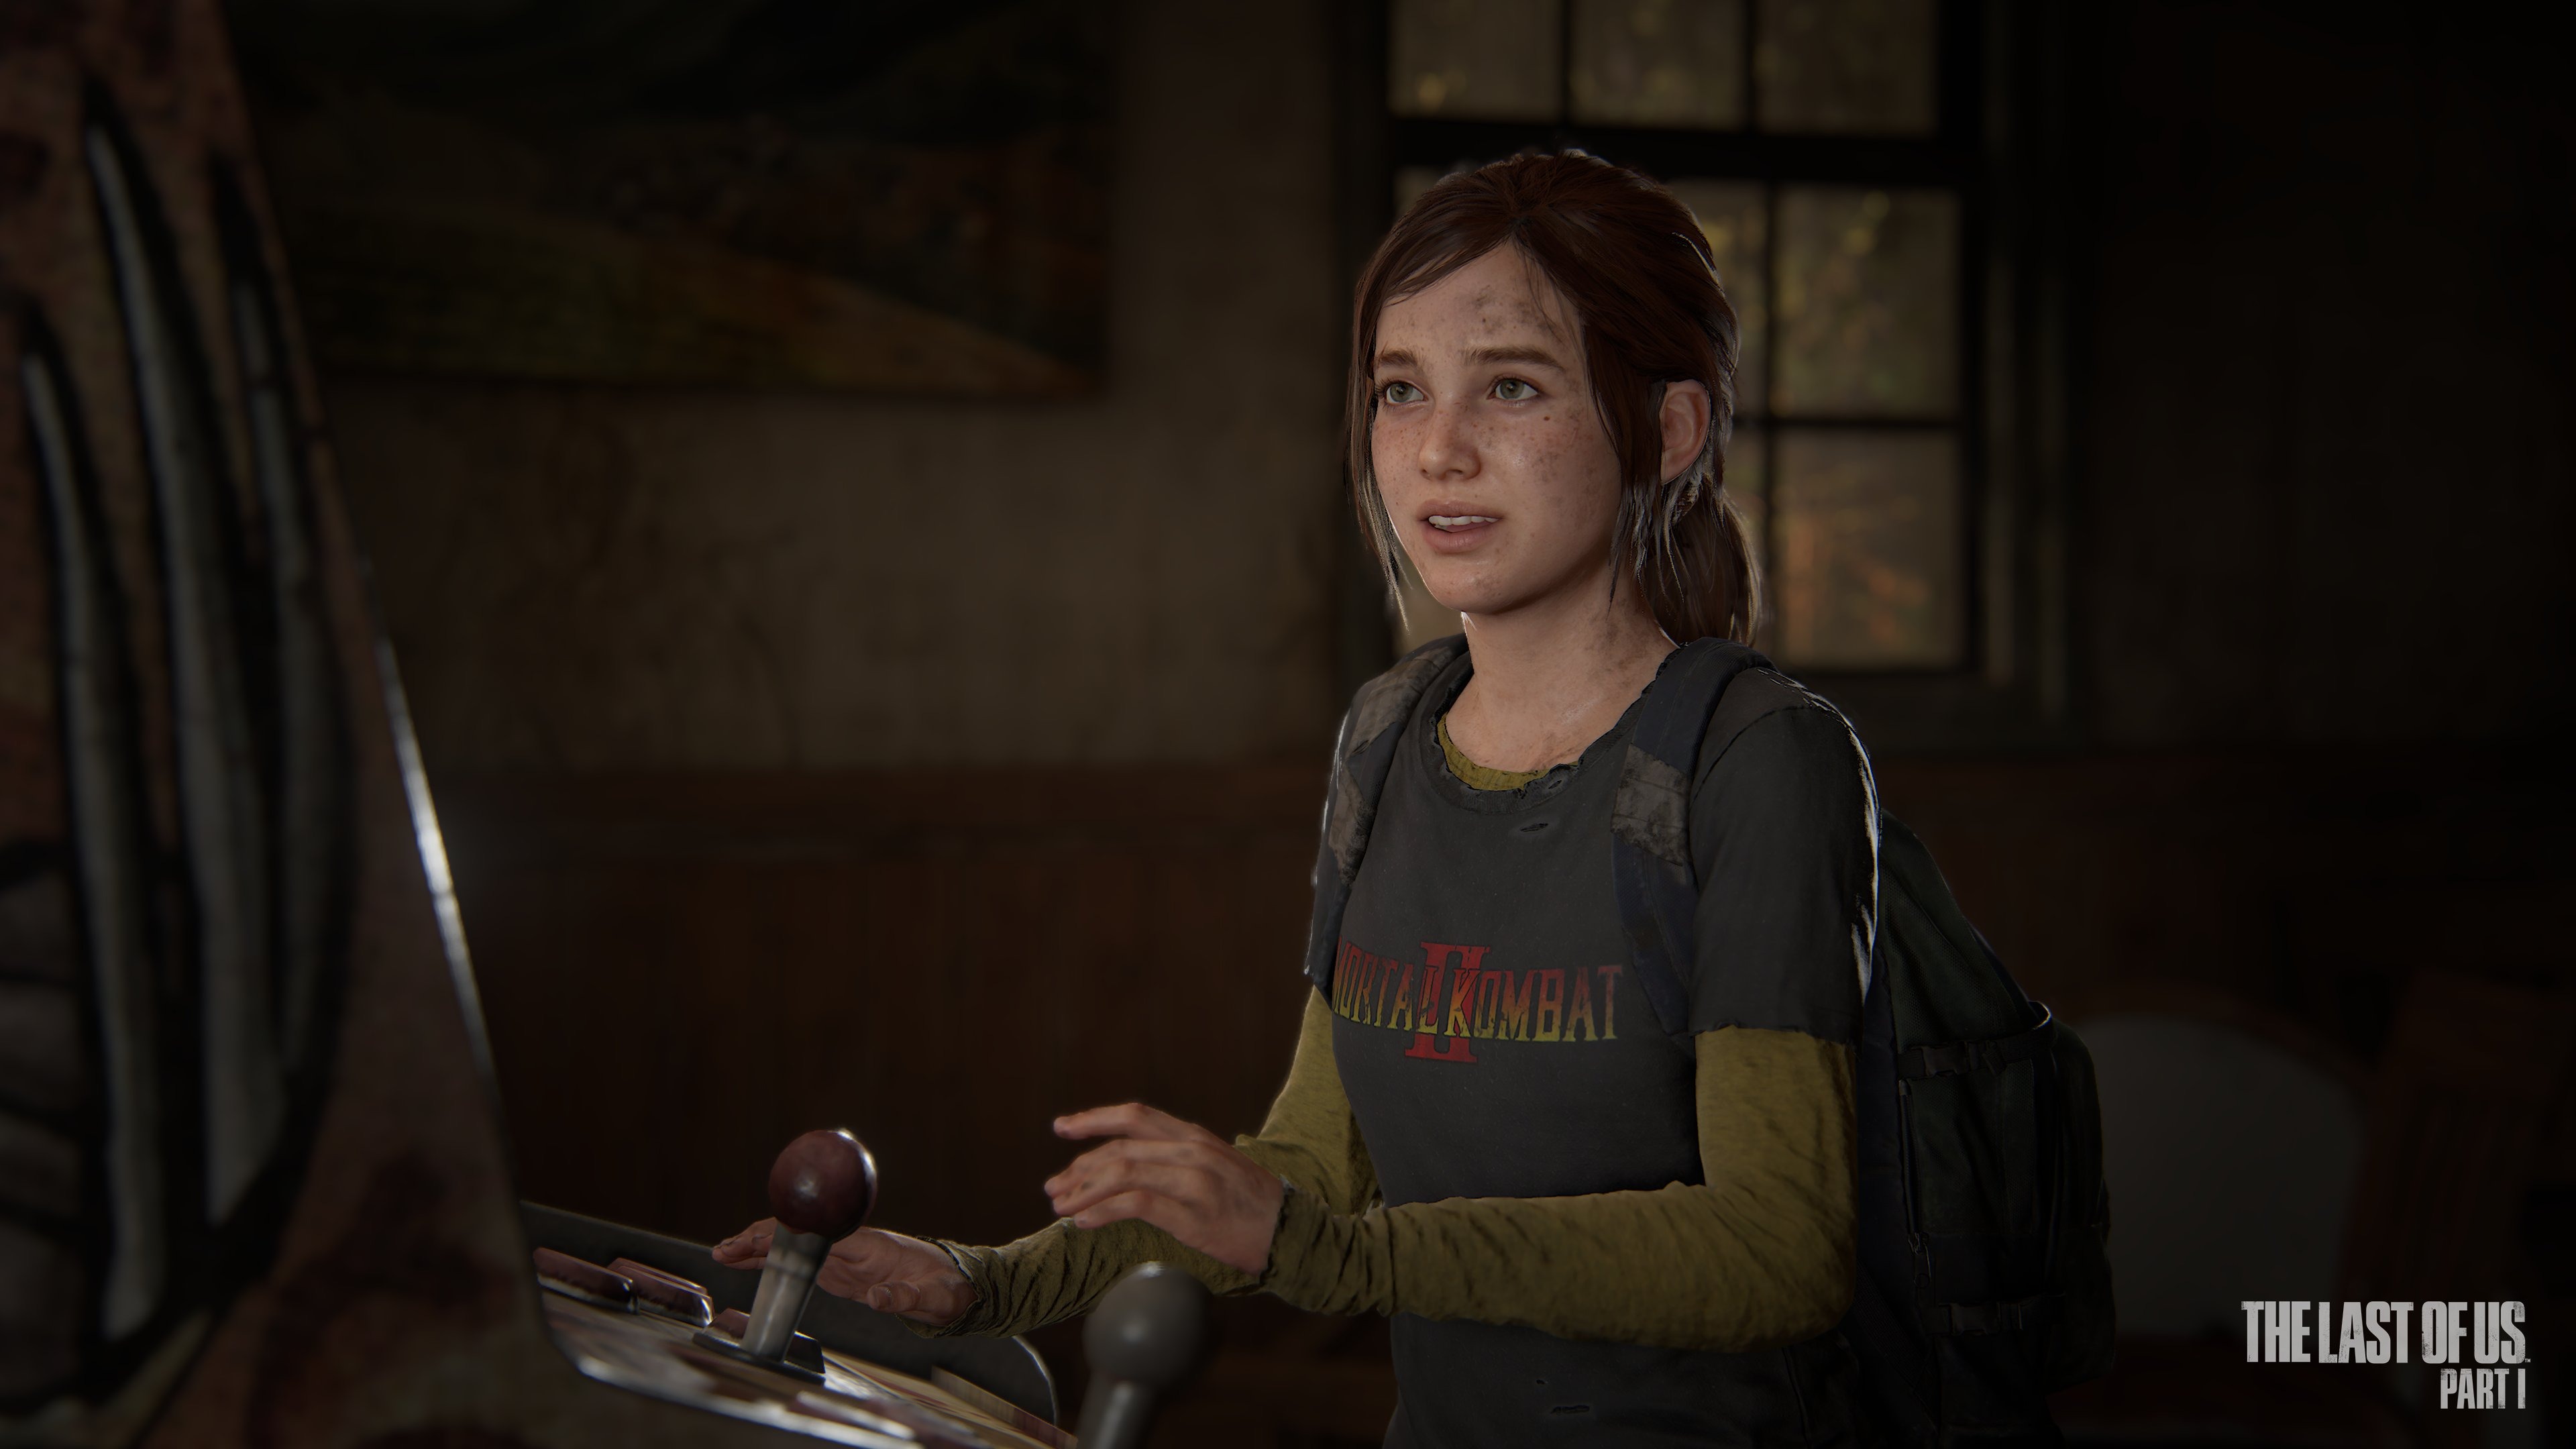 The Last of Us Part 1 Update 1.03 Patch Notes (PS5) - Adds HBO T